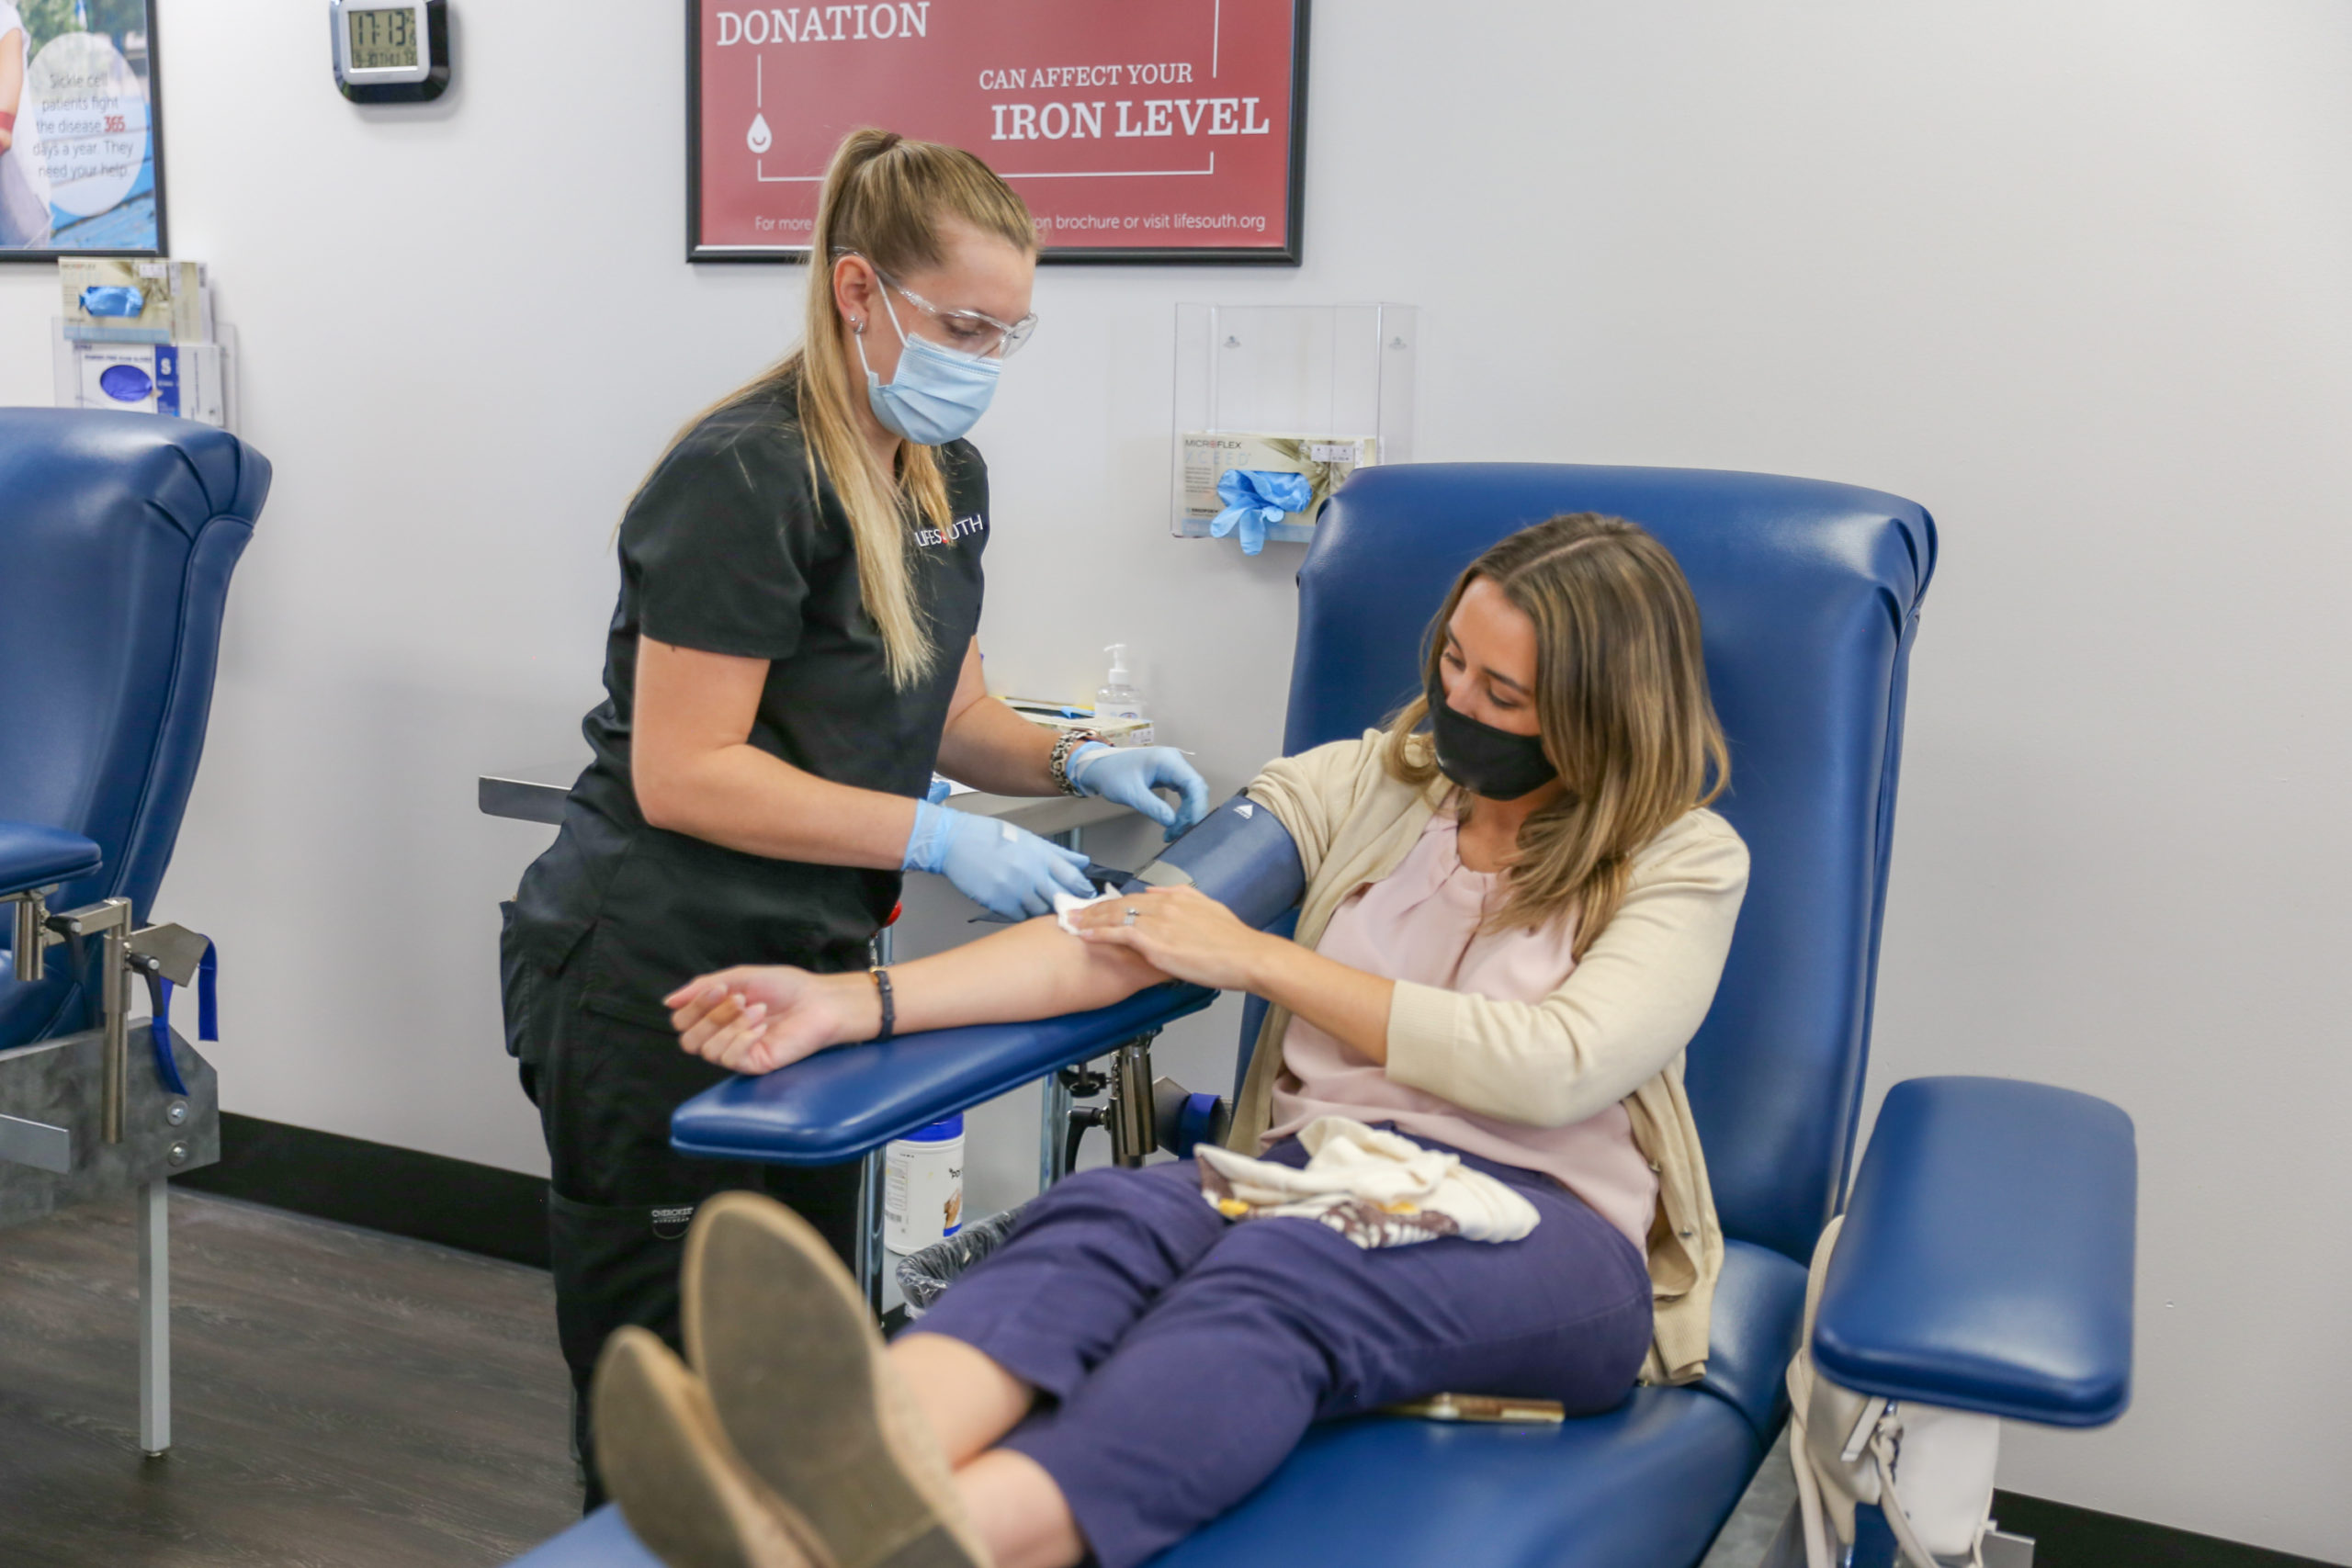 What You Need to Know - LifeSouth Community Blood Centers